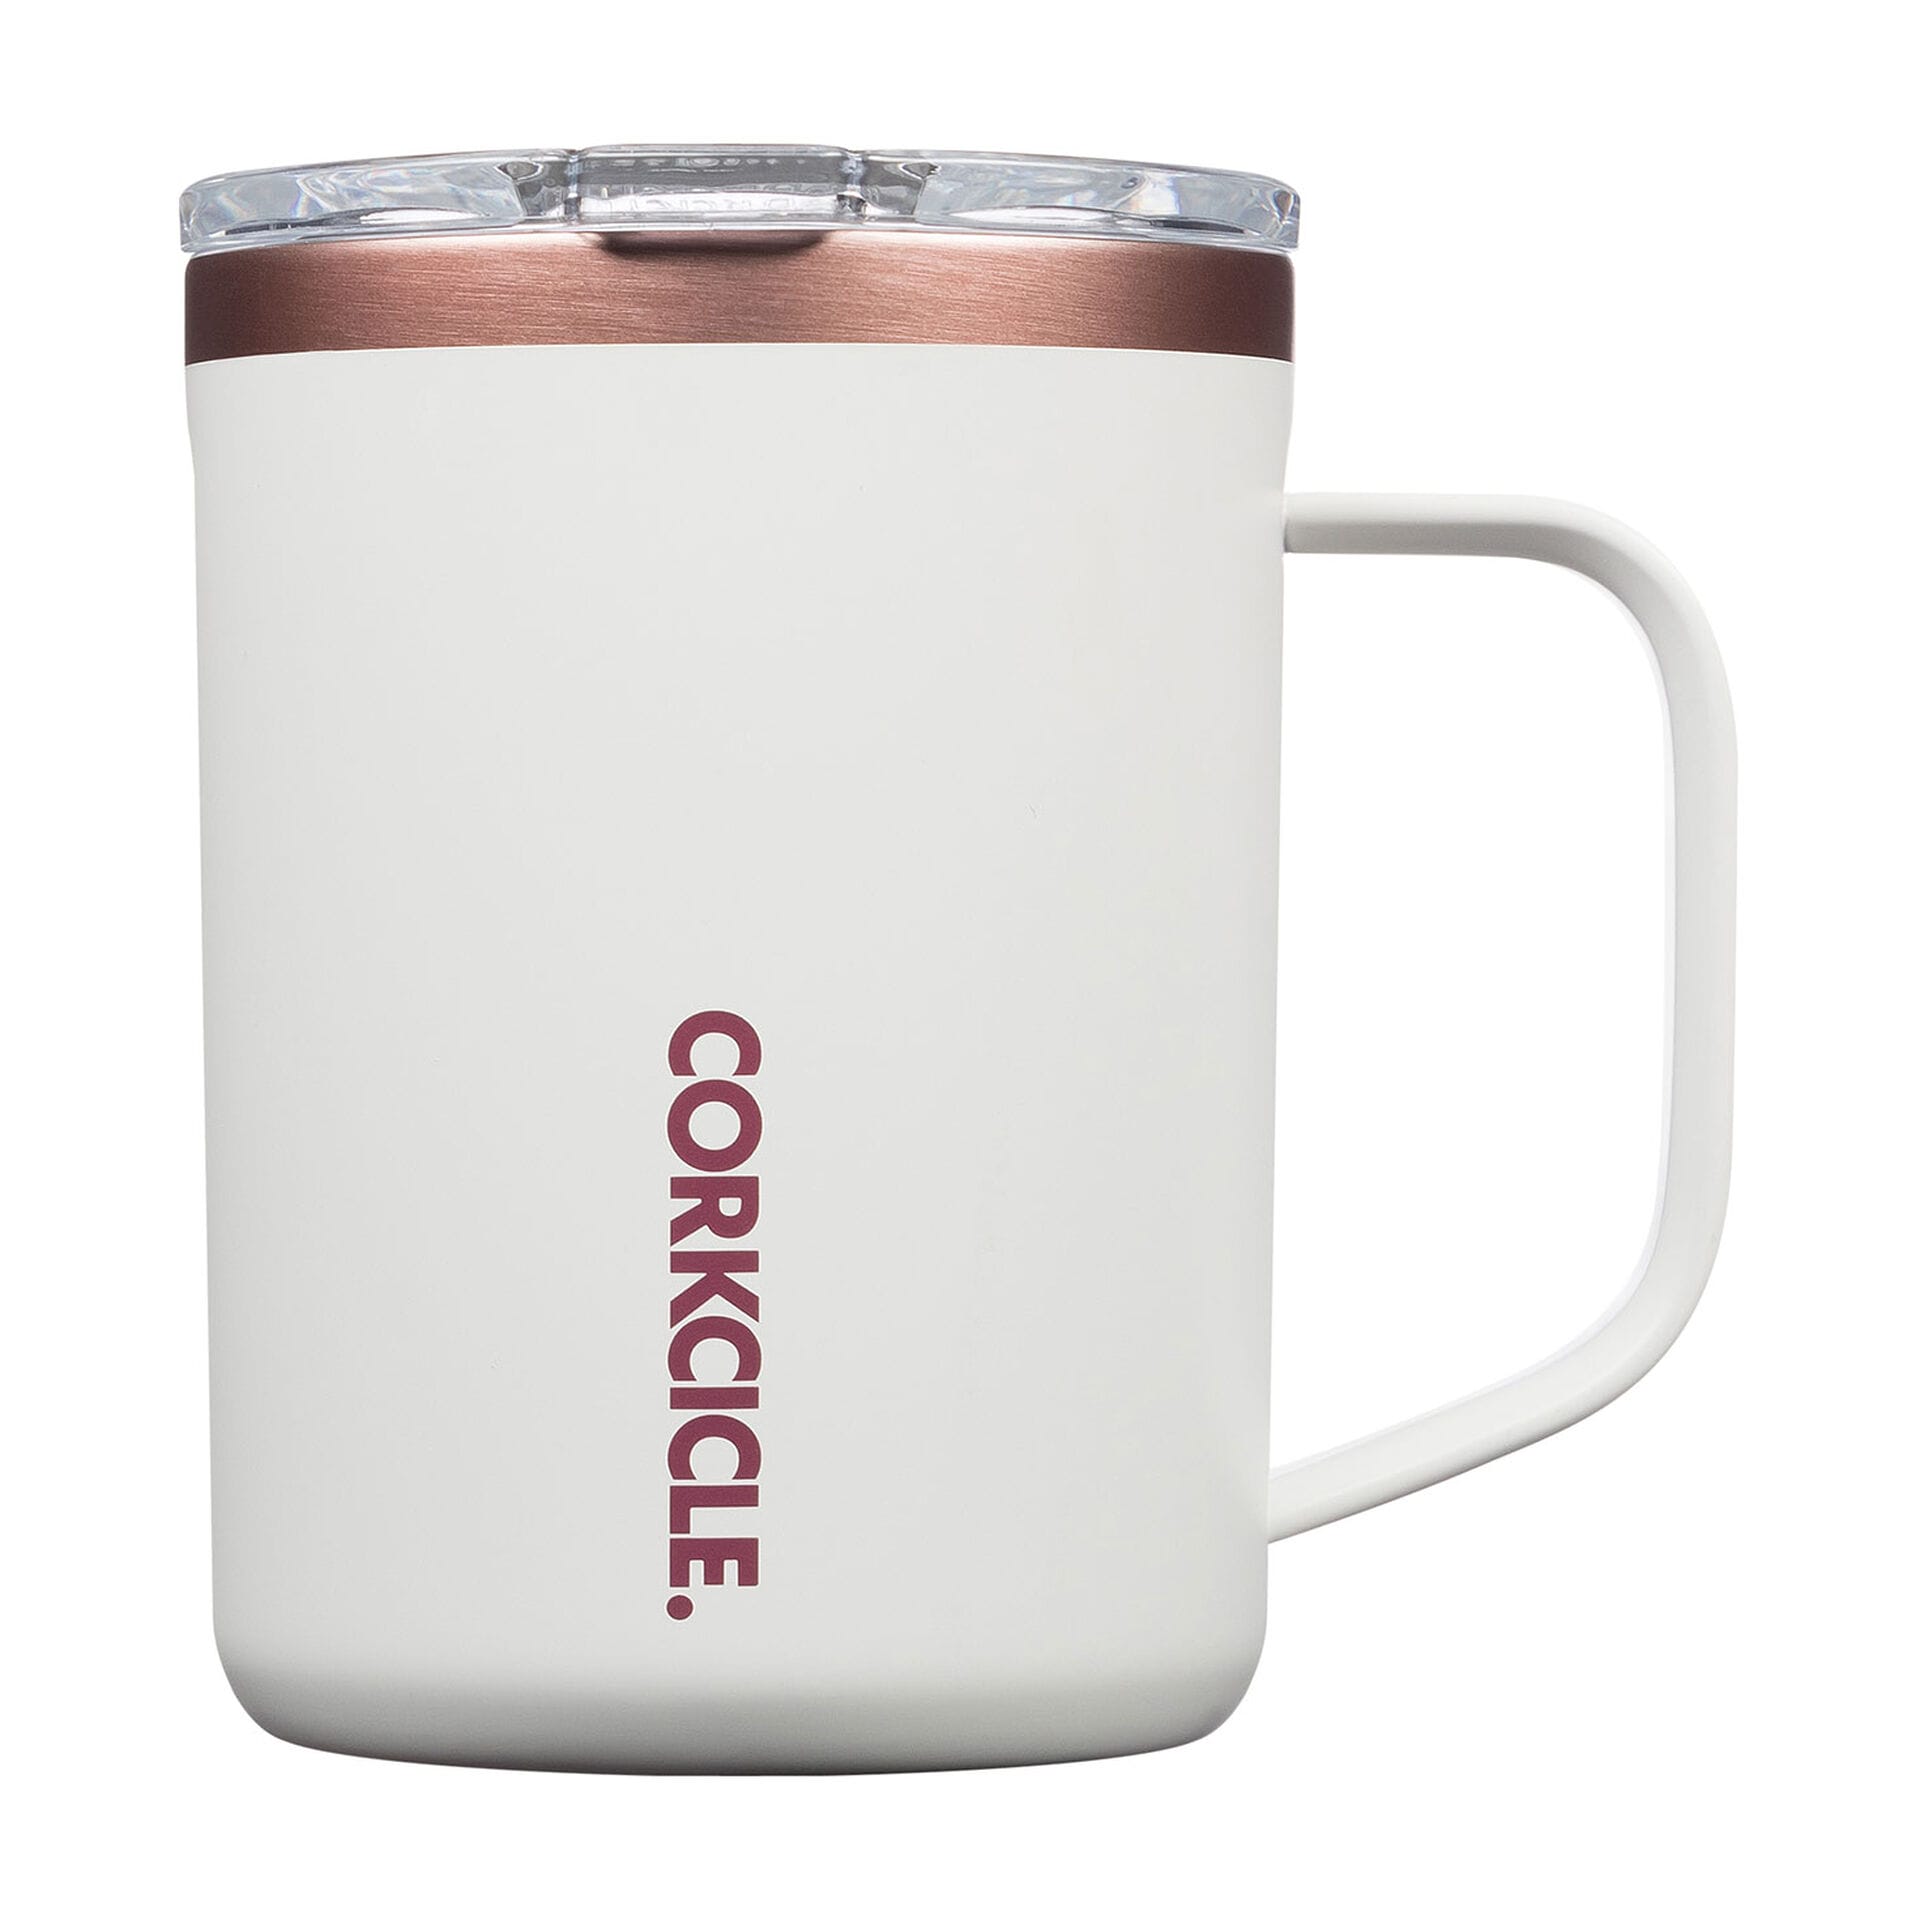 https://eno5ajvtc2k.exactdn.com/wp-content/uploads/2020/07/Corkcicle-White-With-Rose-Gold-Insulated-Mug_2516MWR_01.jpg?strip=all&lossy=1&ssl=1